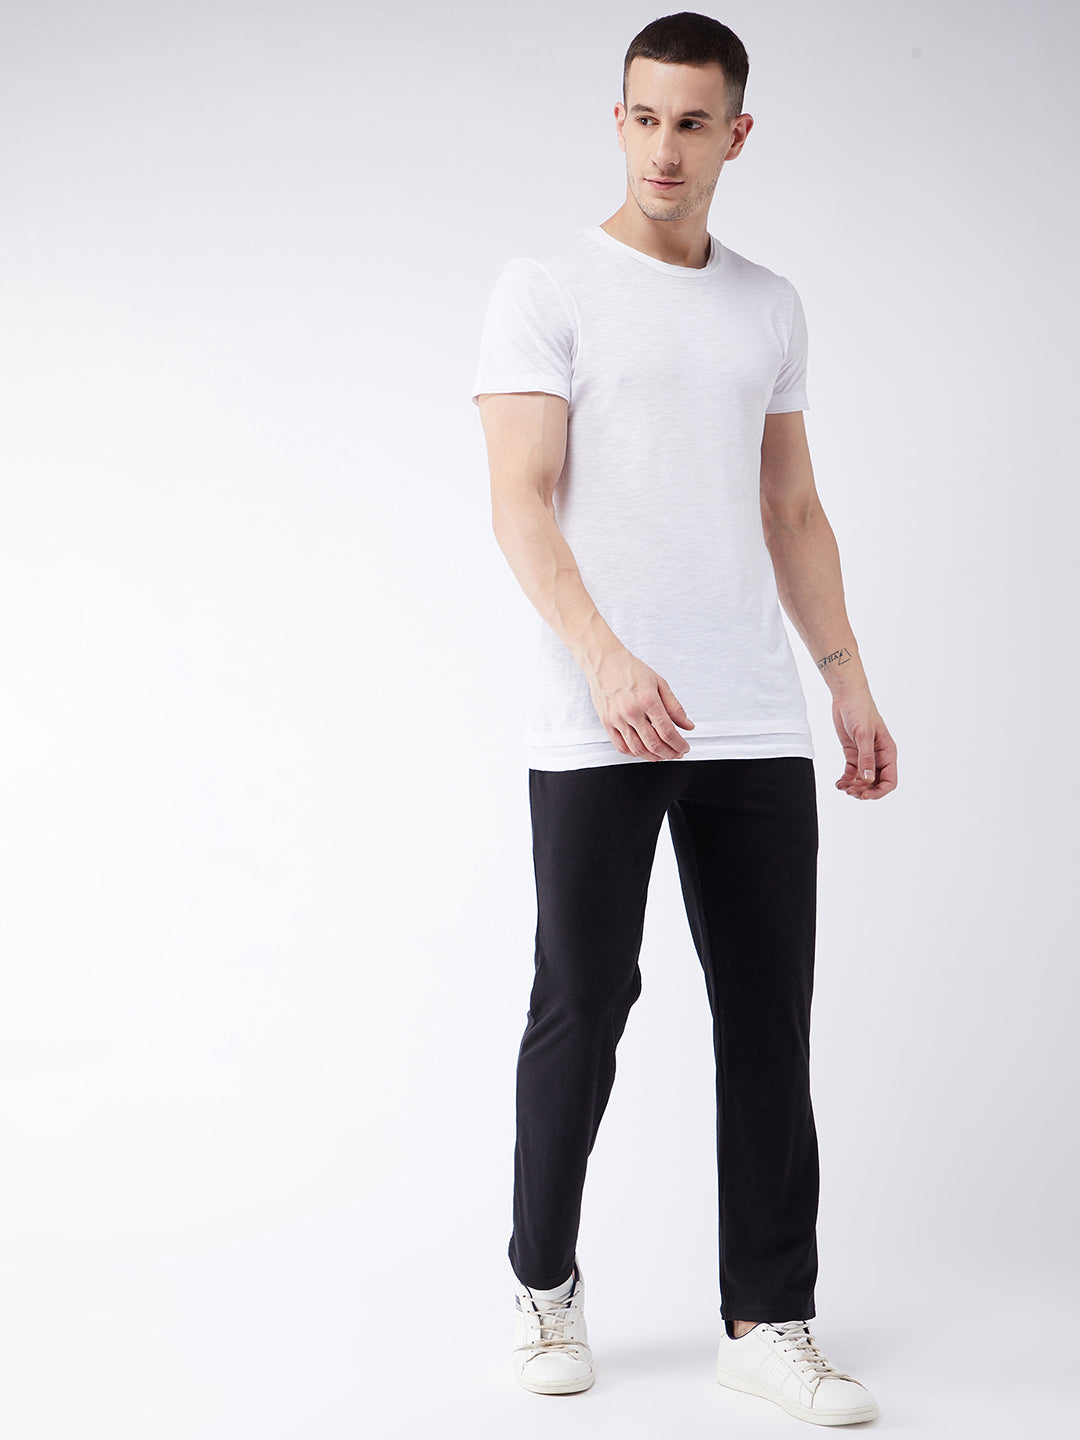 Black Relax fit Trackpant